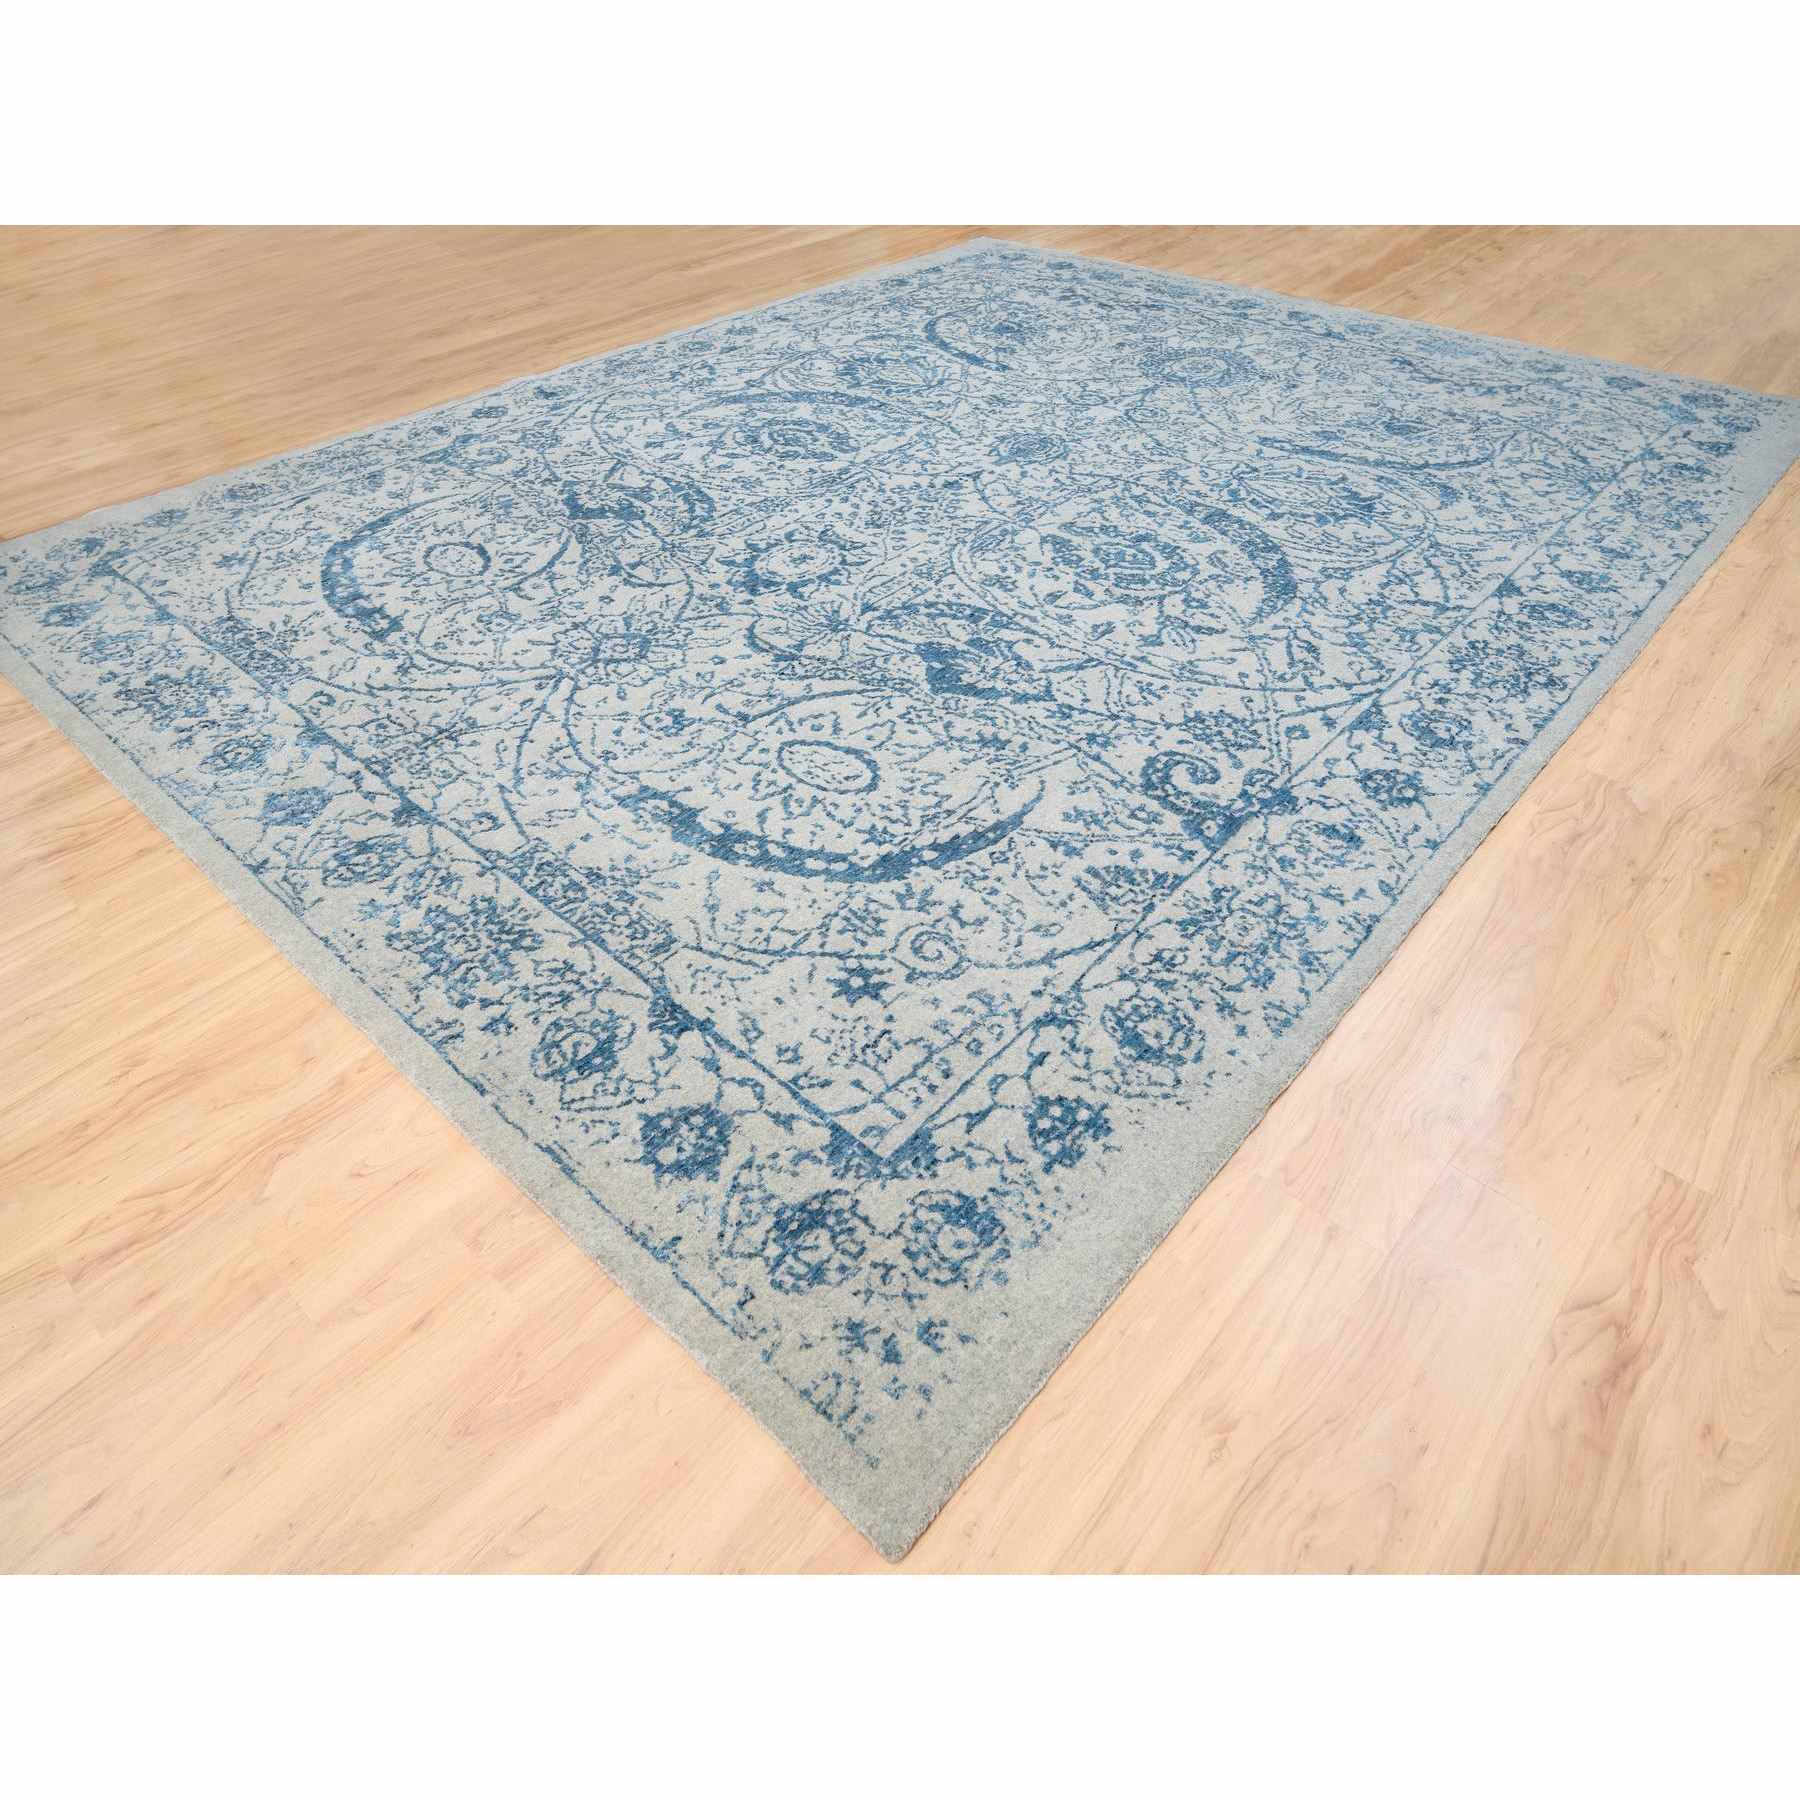 Transitional-Hand-Loomed-Rug-317400